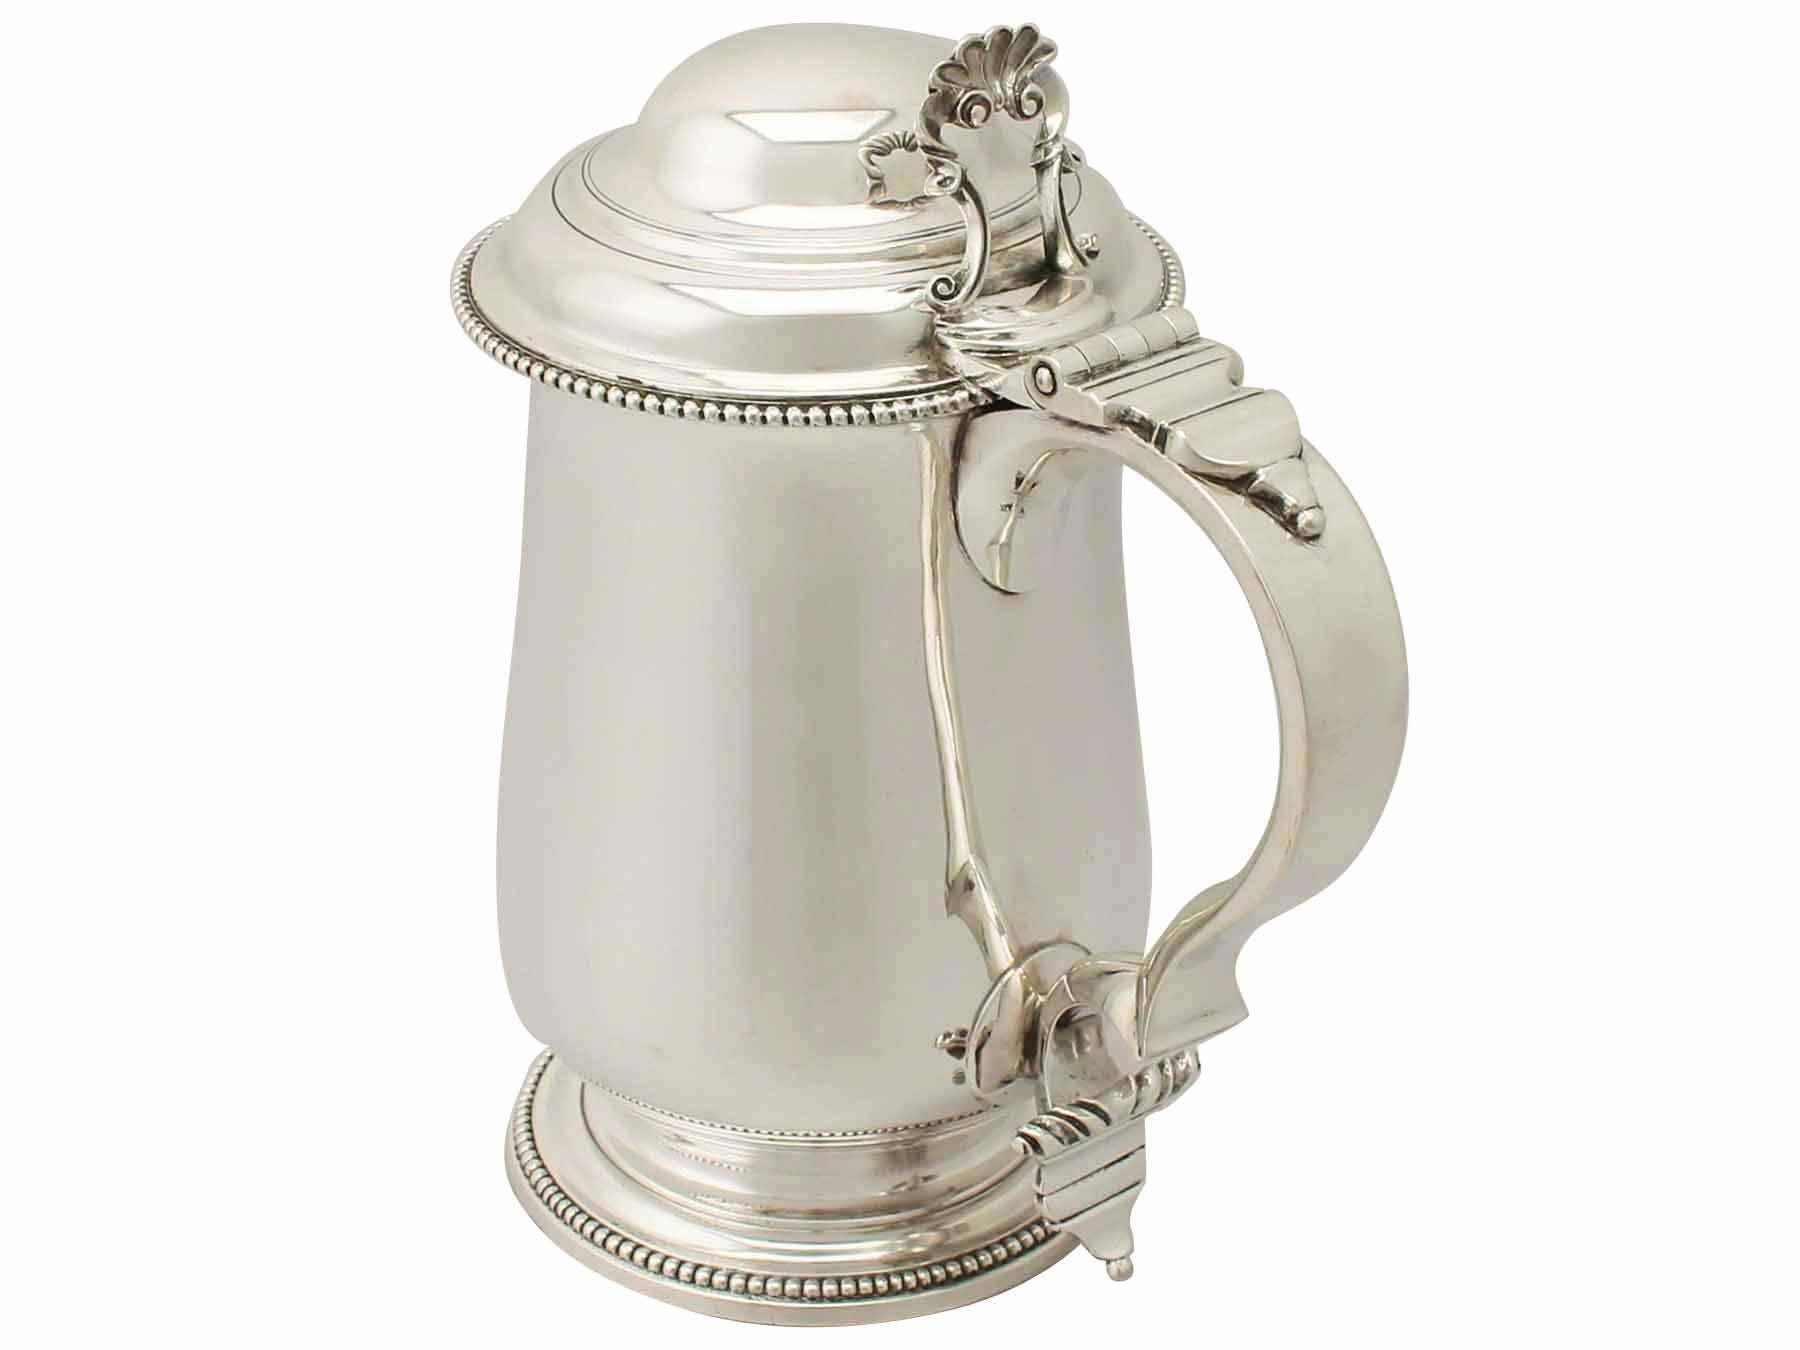 This exceptional antique George III sterling silver quart tankard has a plain baluster form onto a spreading circular foot.

The plain body of this Georgian tankard is embellished with an impressive bright cut engraved oval cartouche encompassed